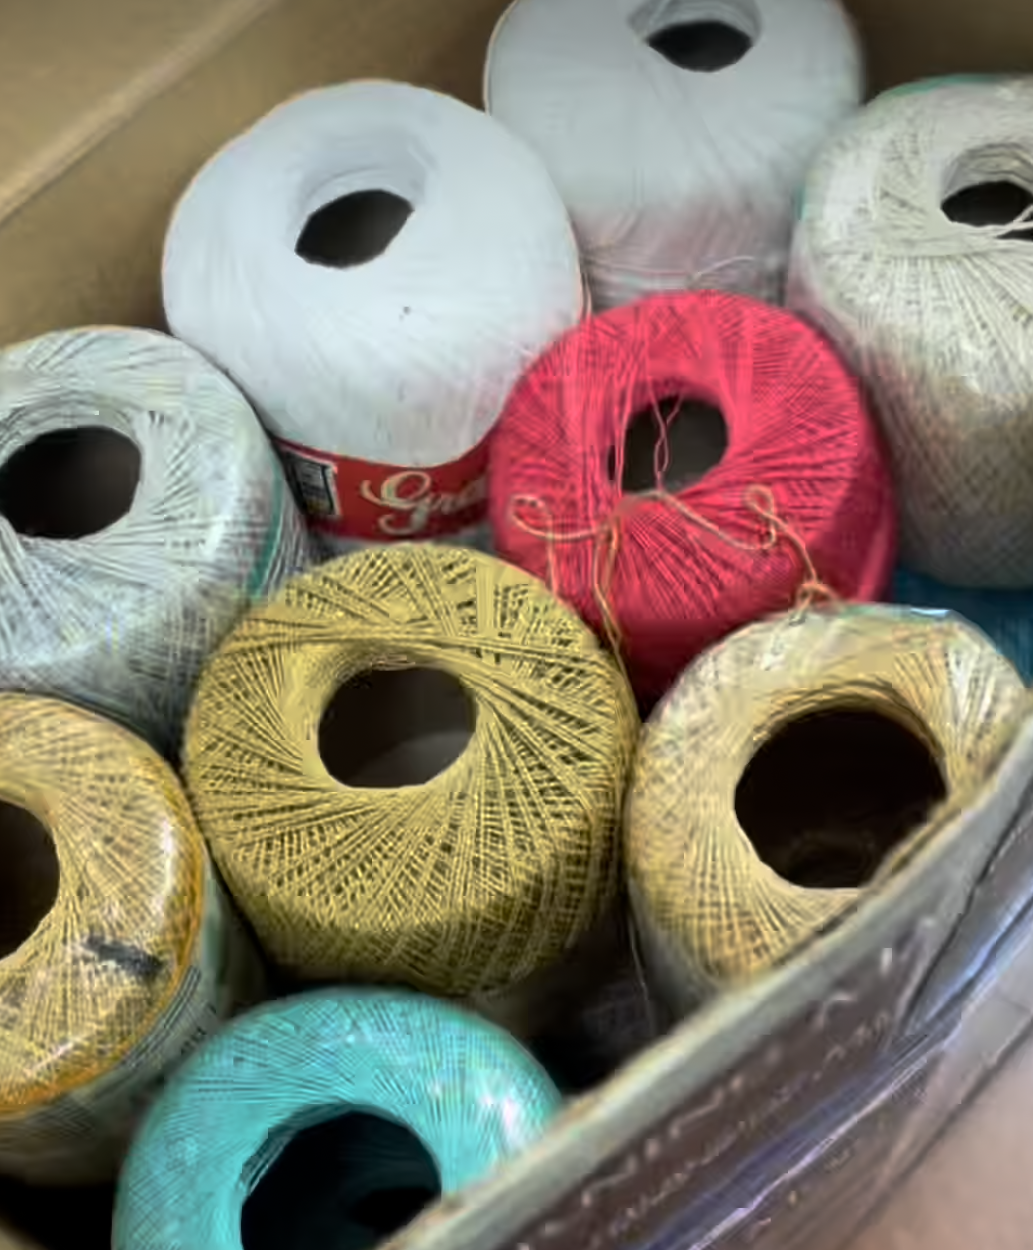 Crochet Cotton Thread Bundle - Various Colors and Weights 3.5 POUNDS